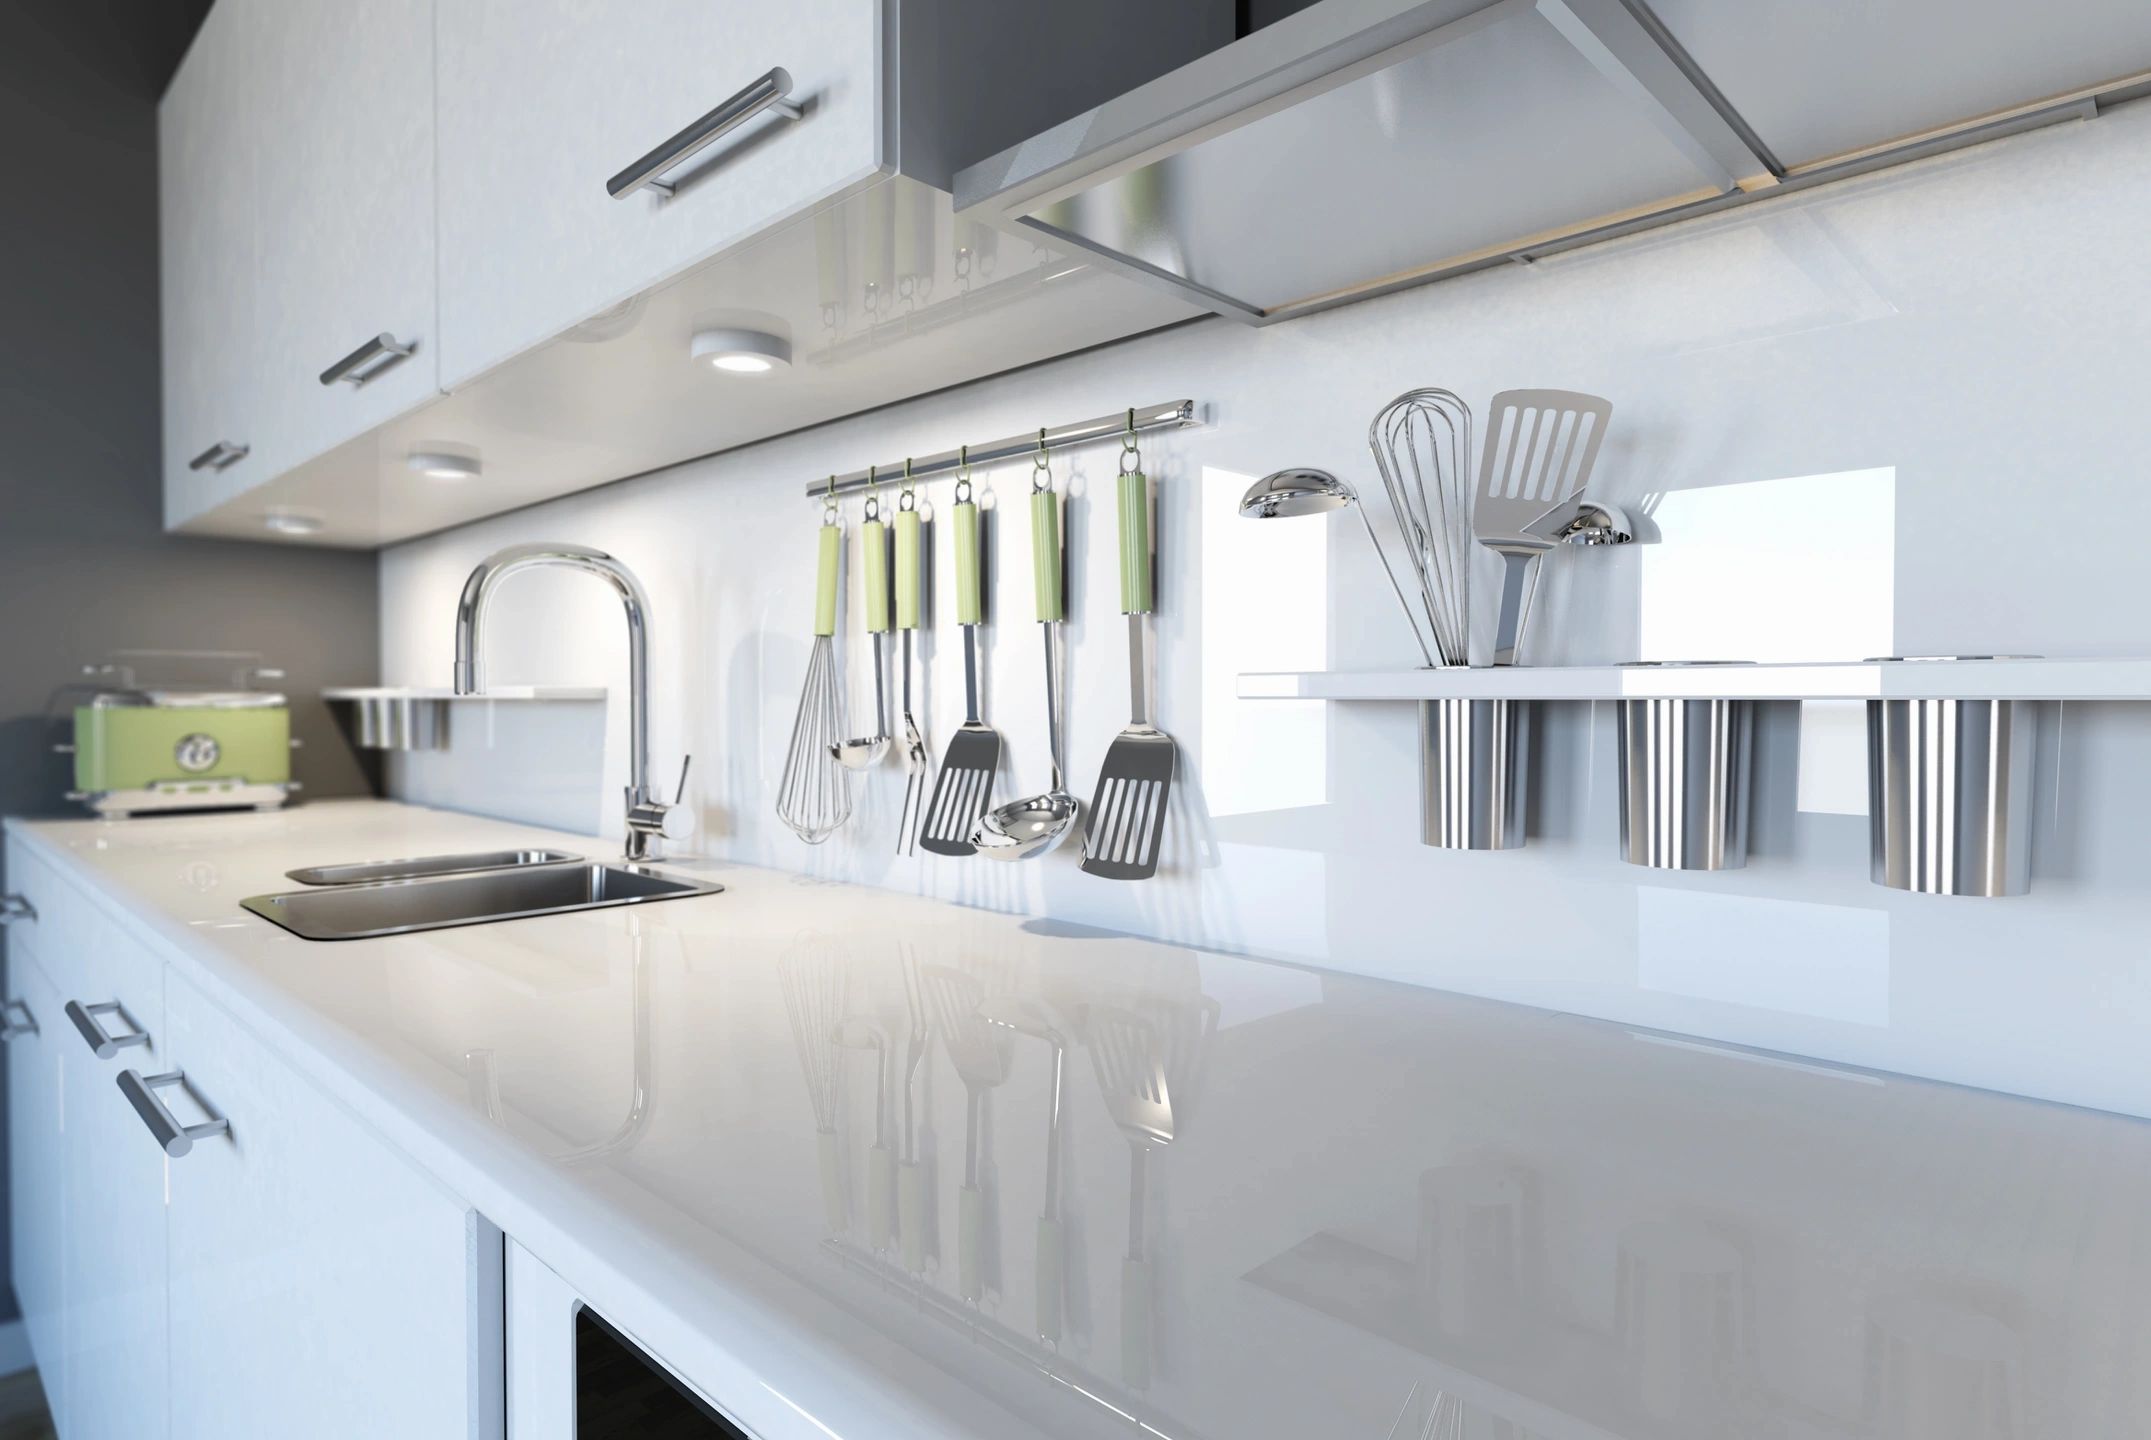 Todays Designer Kitchens qtq80-0miS94 Make Your Kitchen Look Bigger With These Tips 